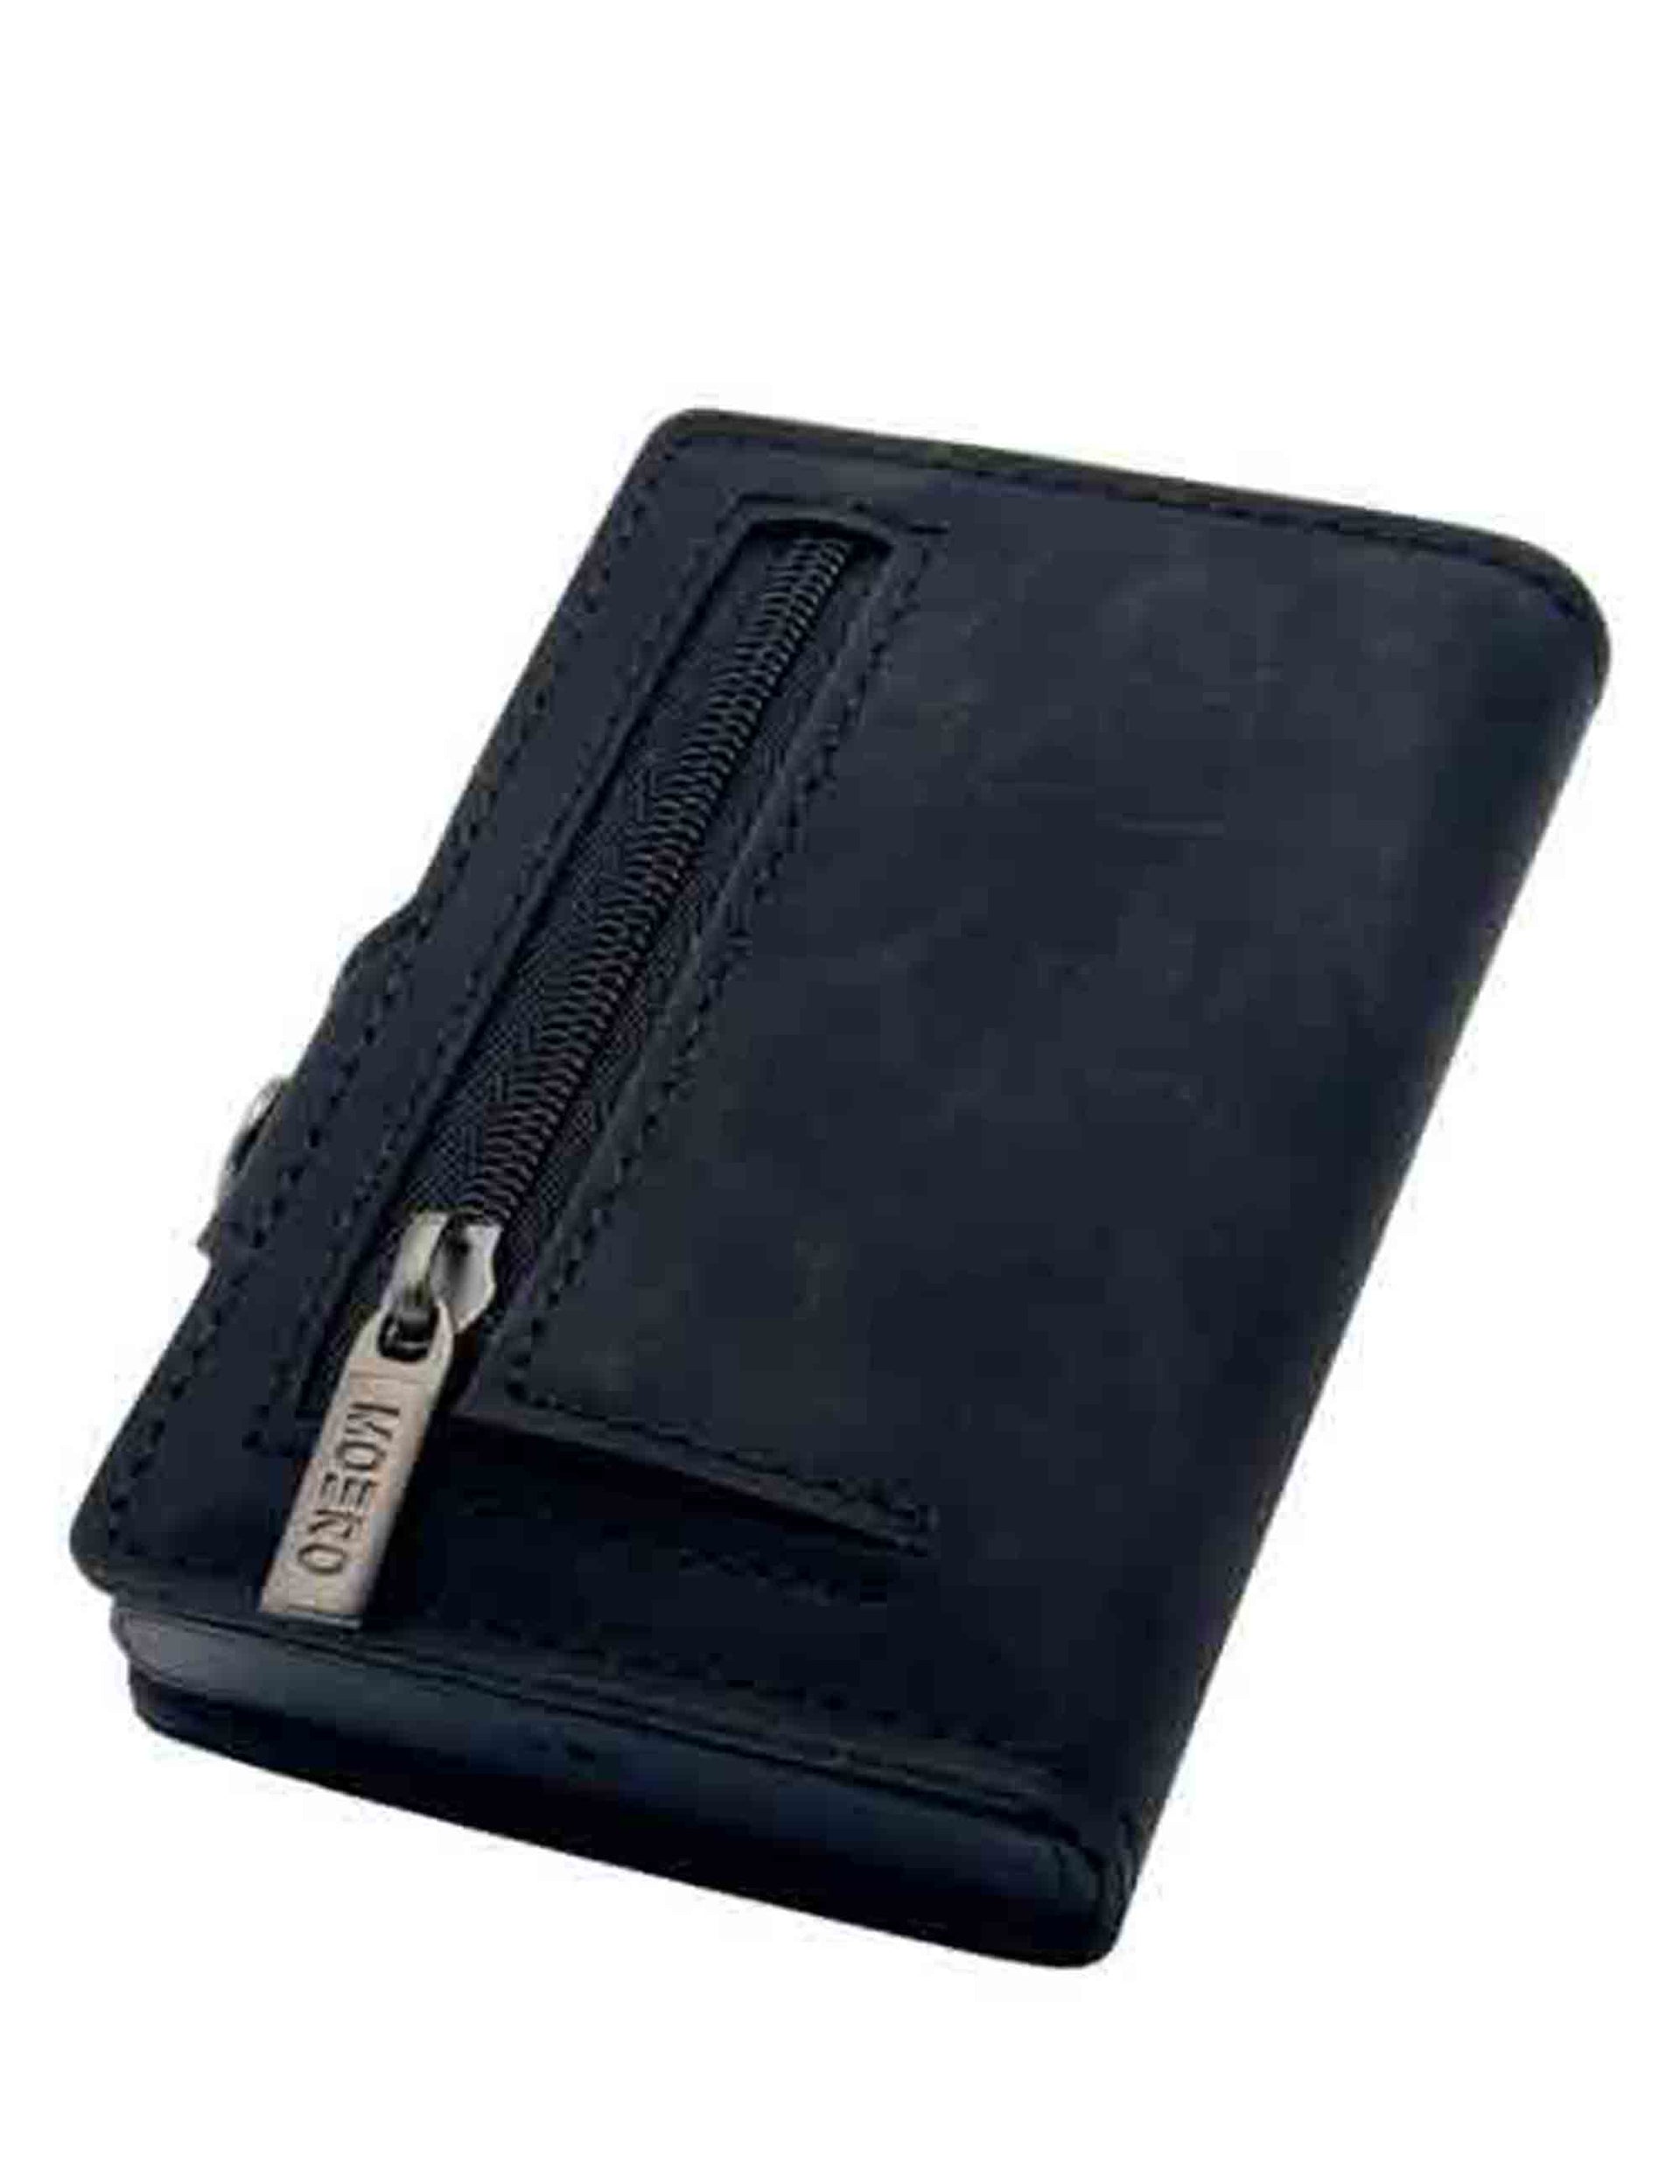 Vintage black eco leather card holder with coin purse